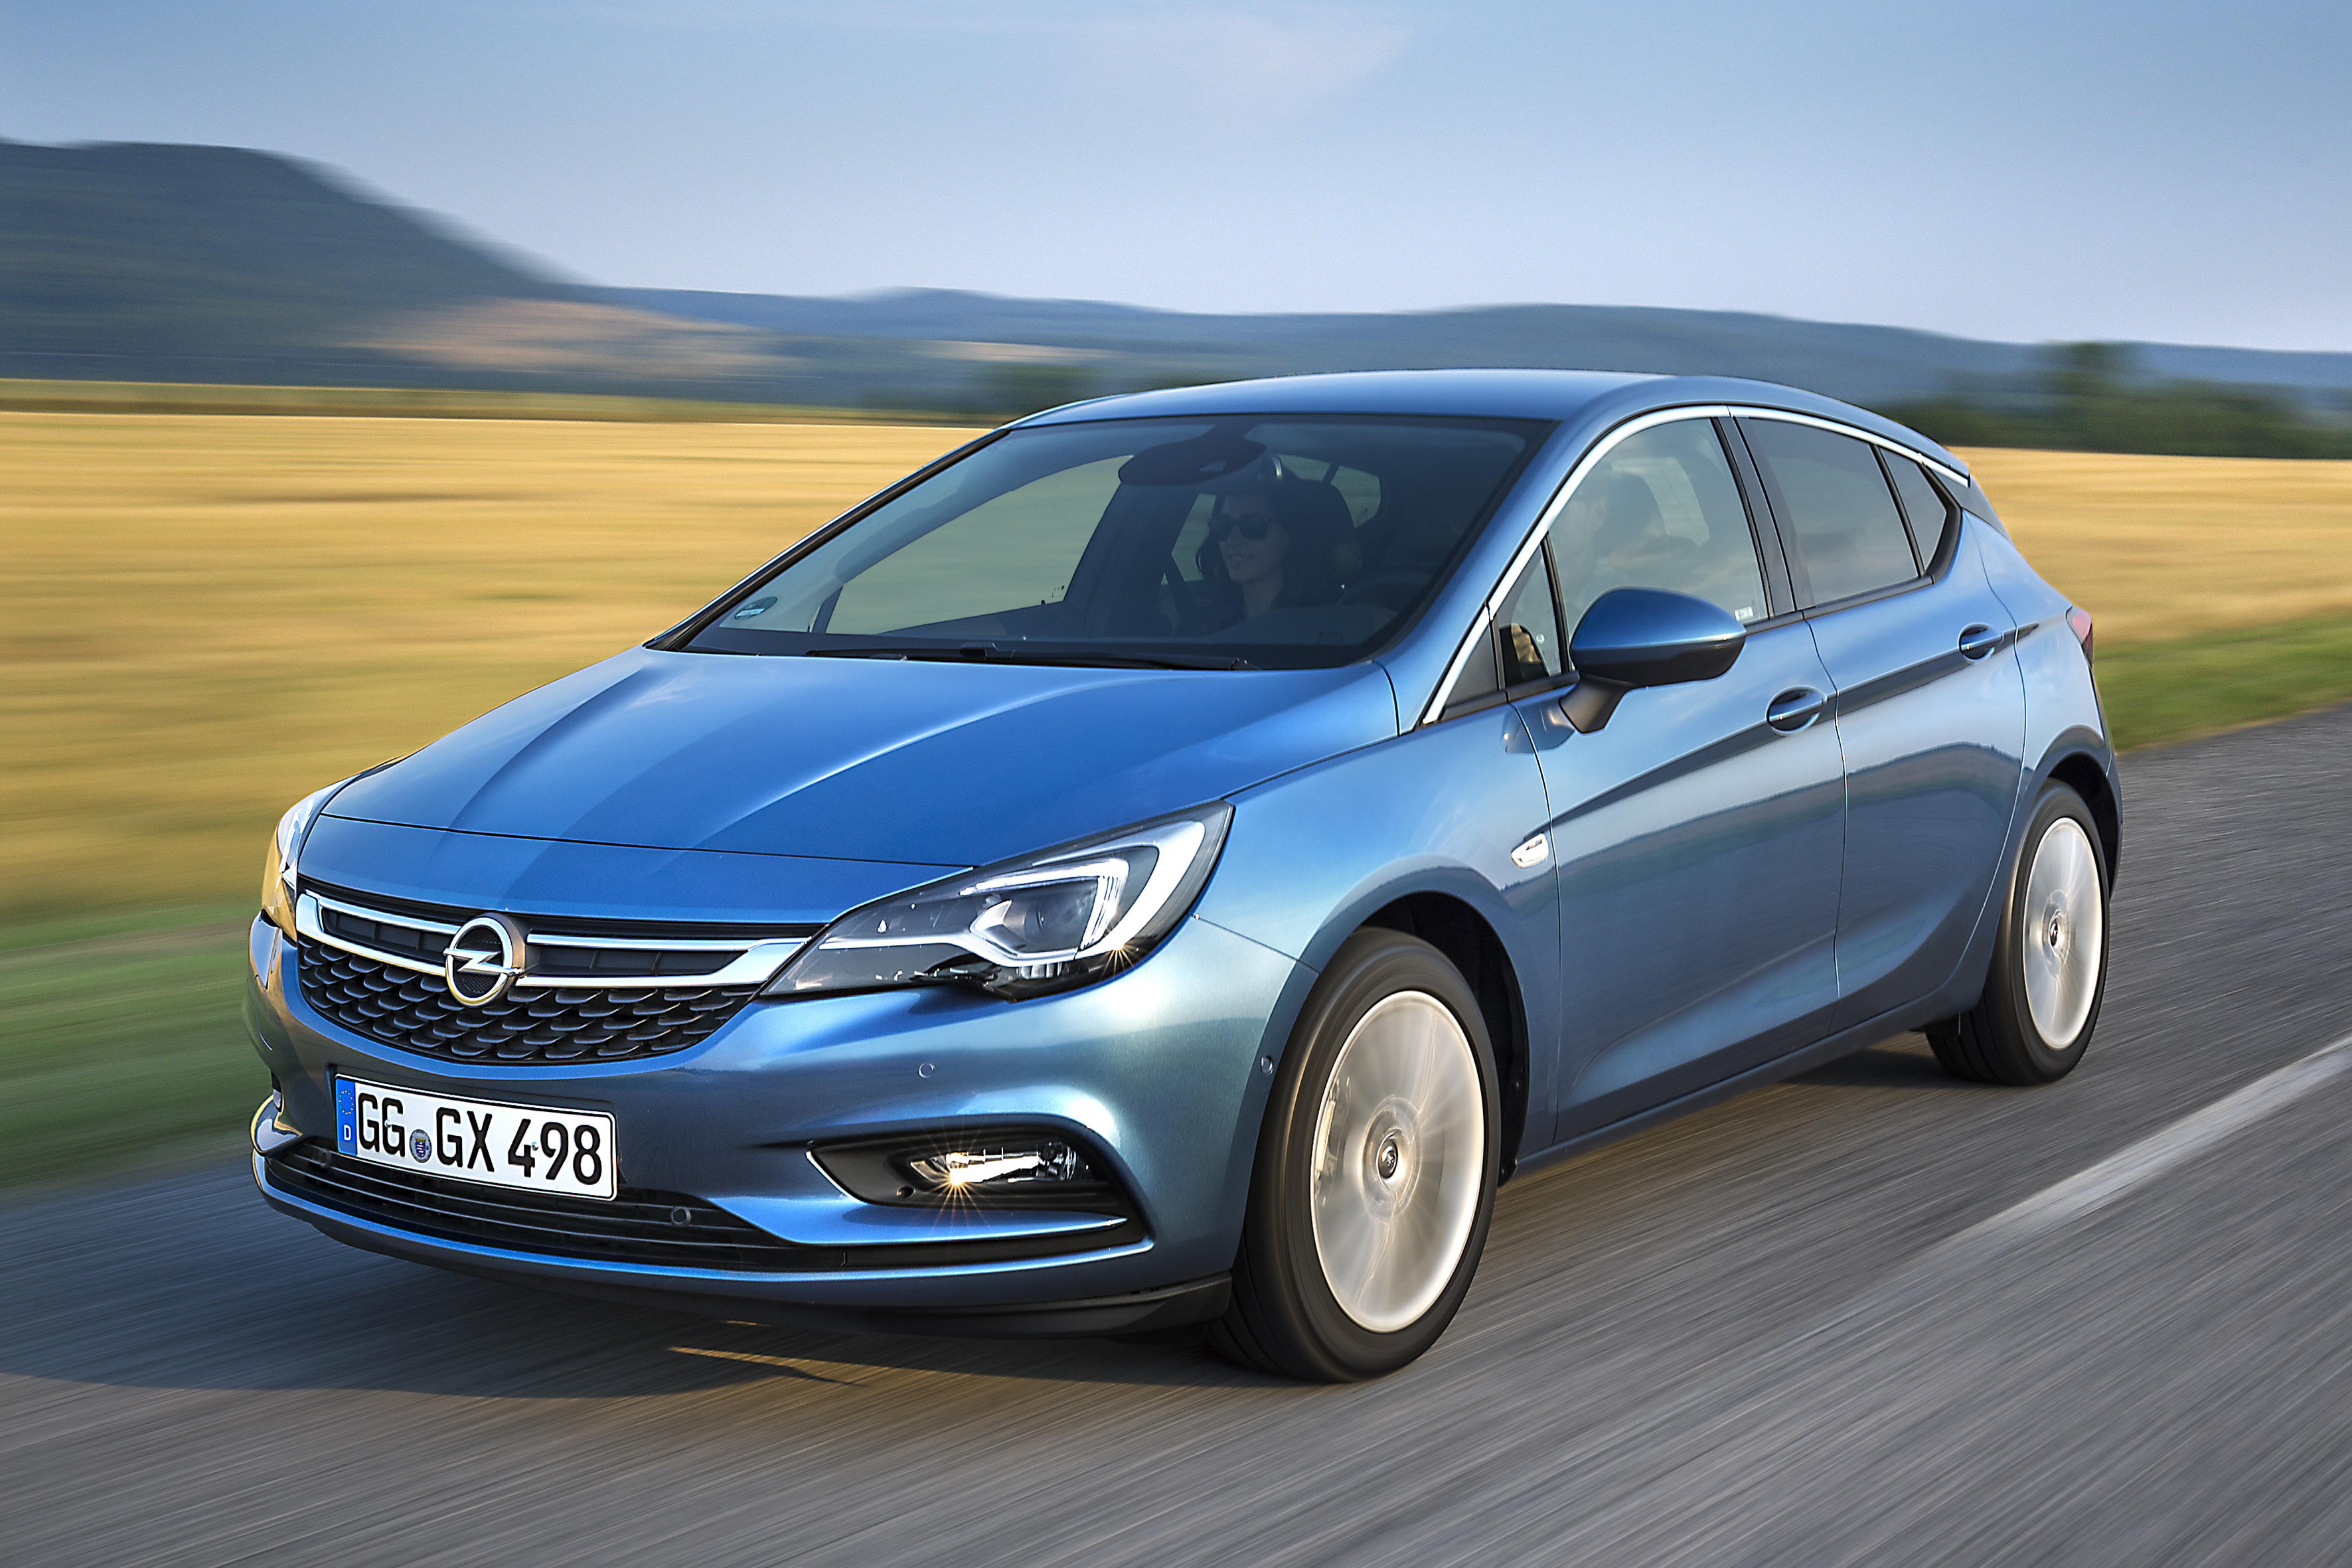 Hassle Free Travel With Opel Astra And Clever Accessories Opel Automobile Gmbh Pressemitteilung Lifepr